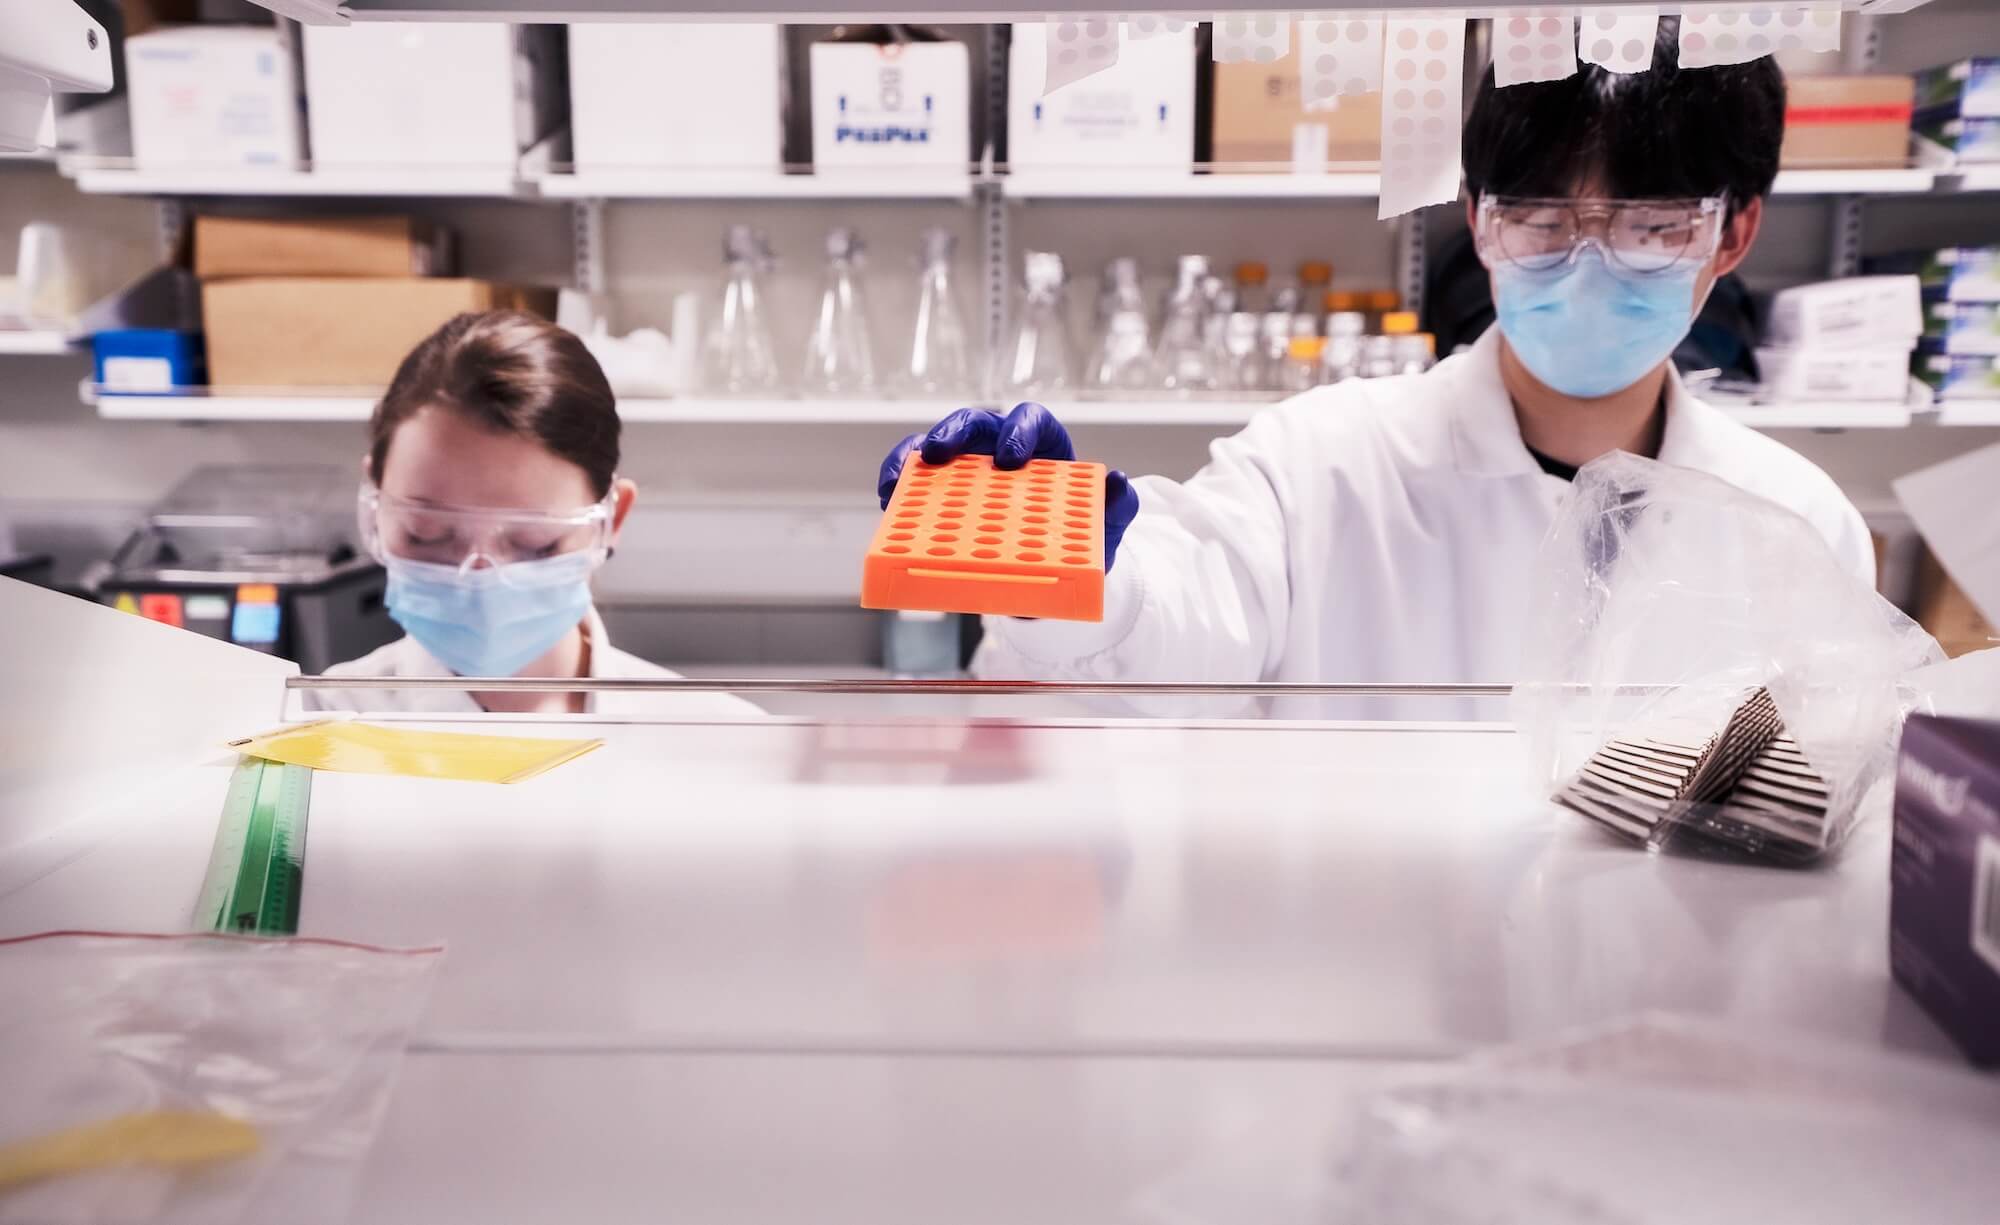 Researchers at the Allen Institute for Immunology working in the lab